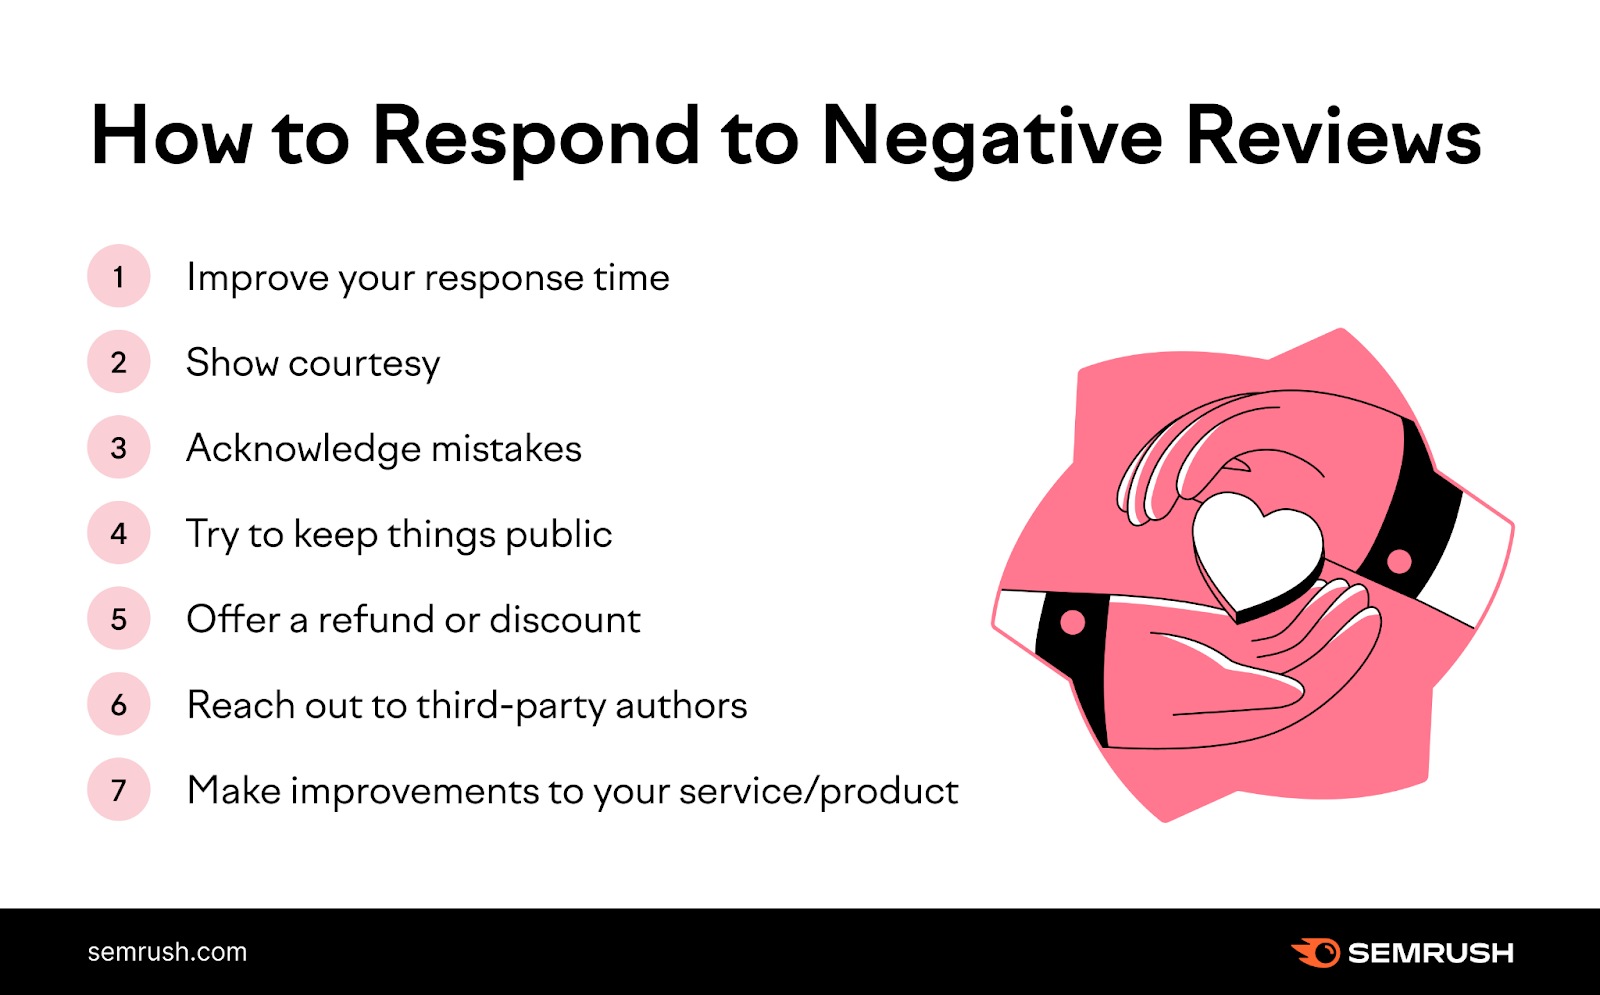 Respond to negative review: improve response time, show courtesy, acknowledge mistakes, keep it public, offer refund or discount, reach out to third-party authors, improve service/product.